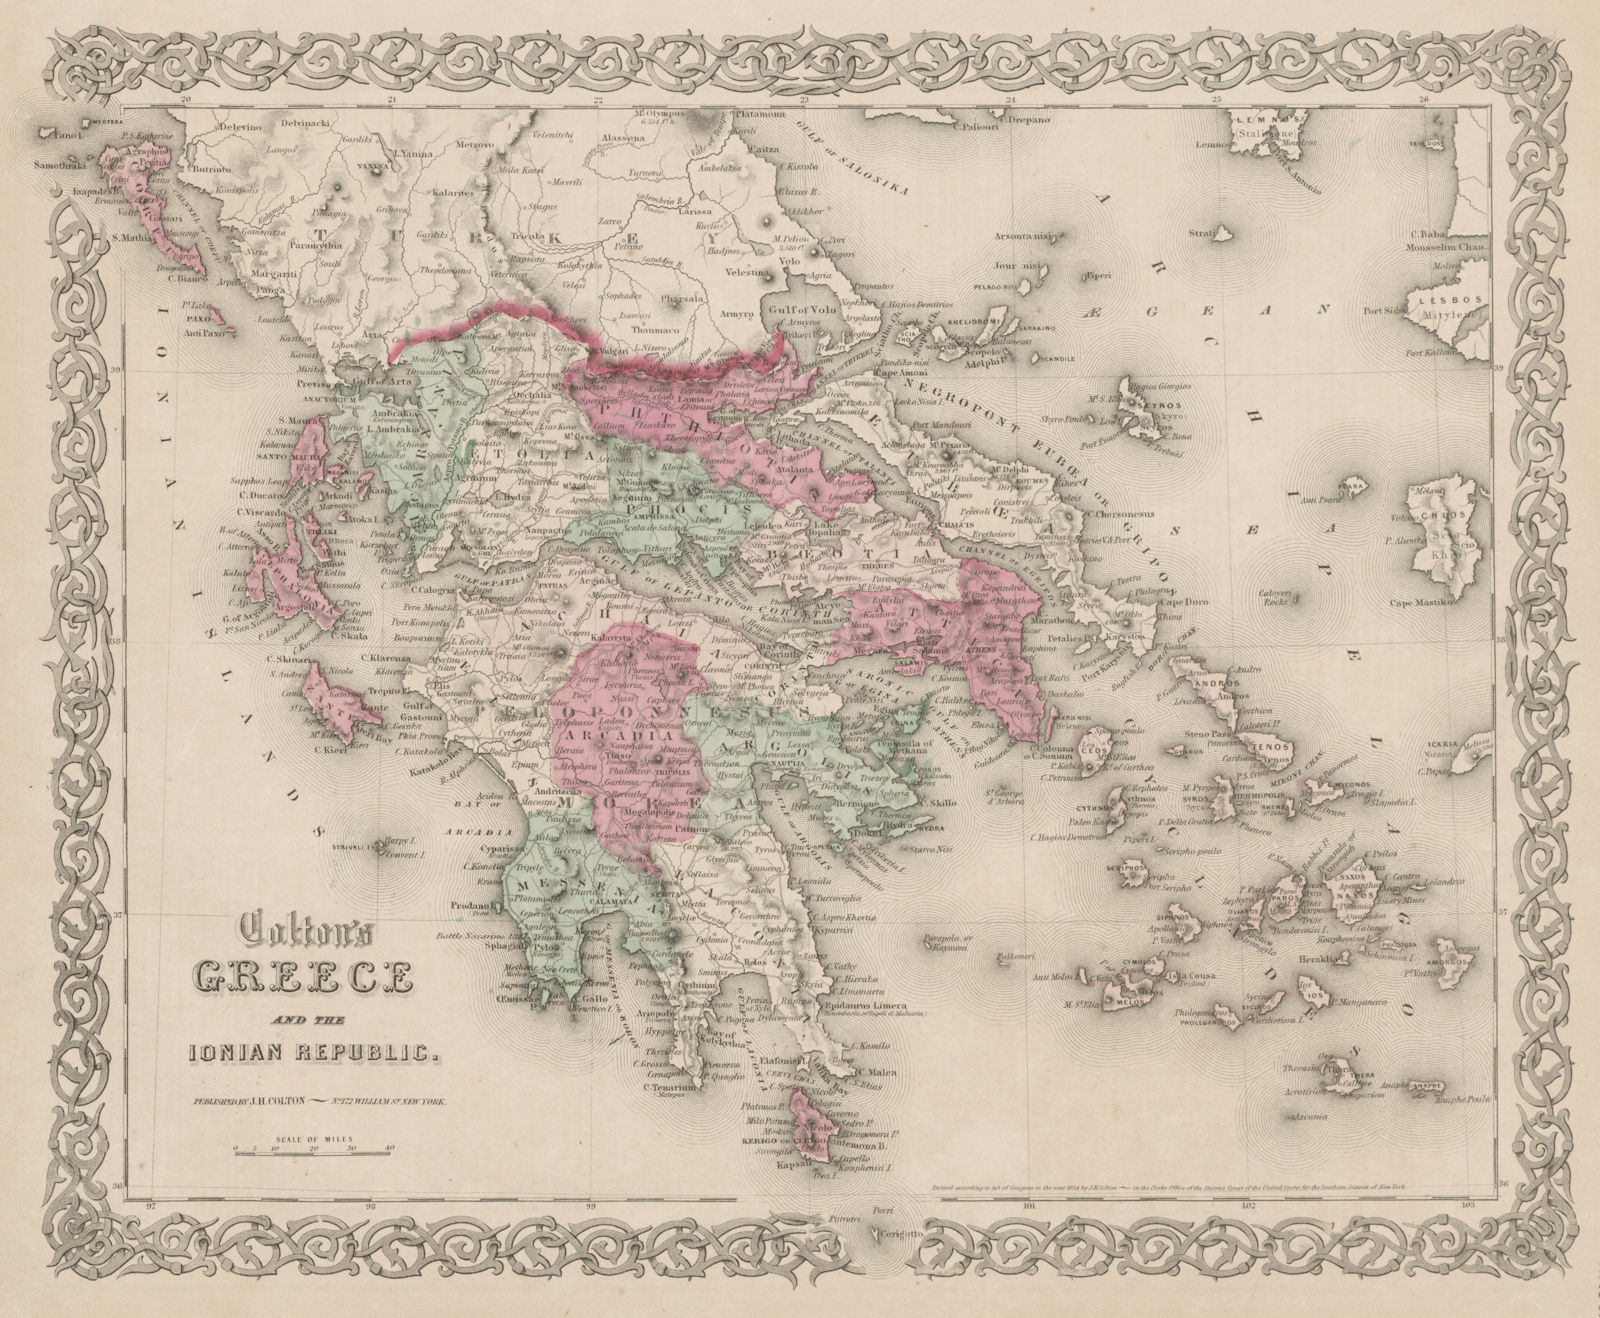 "Colton's Greece and the Ionian Republic". Cyclades Aegean Sporades 1863 map